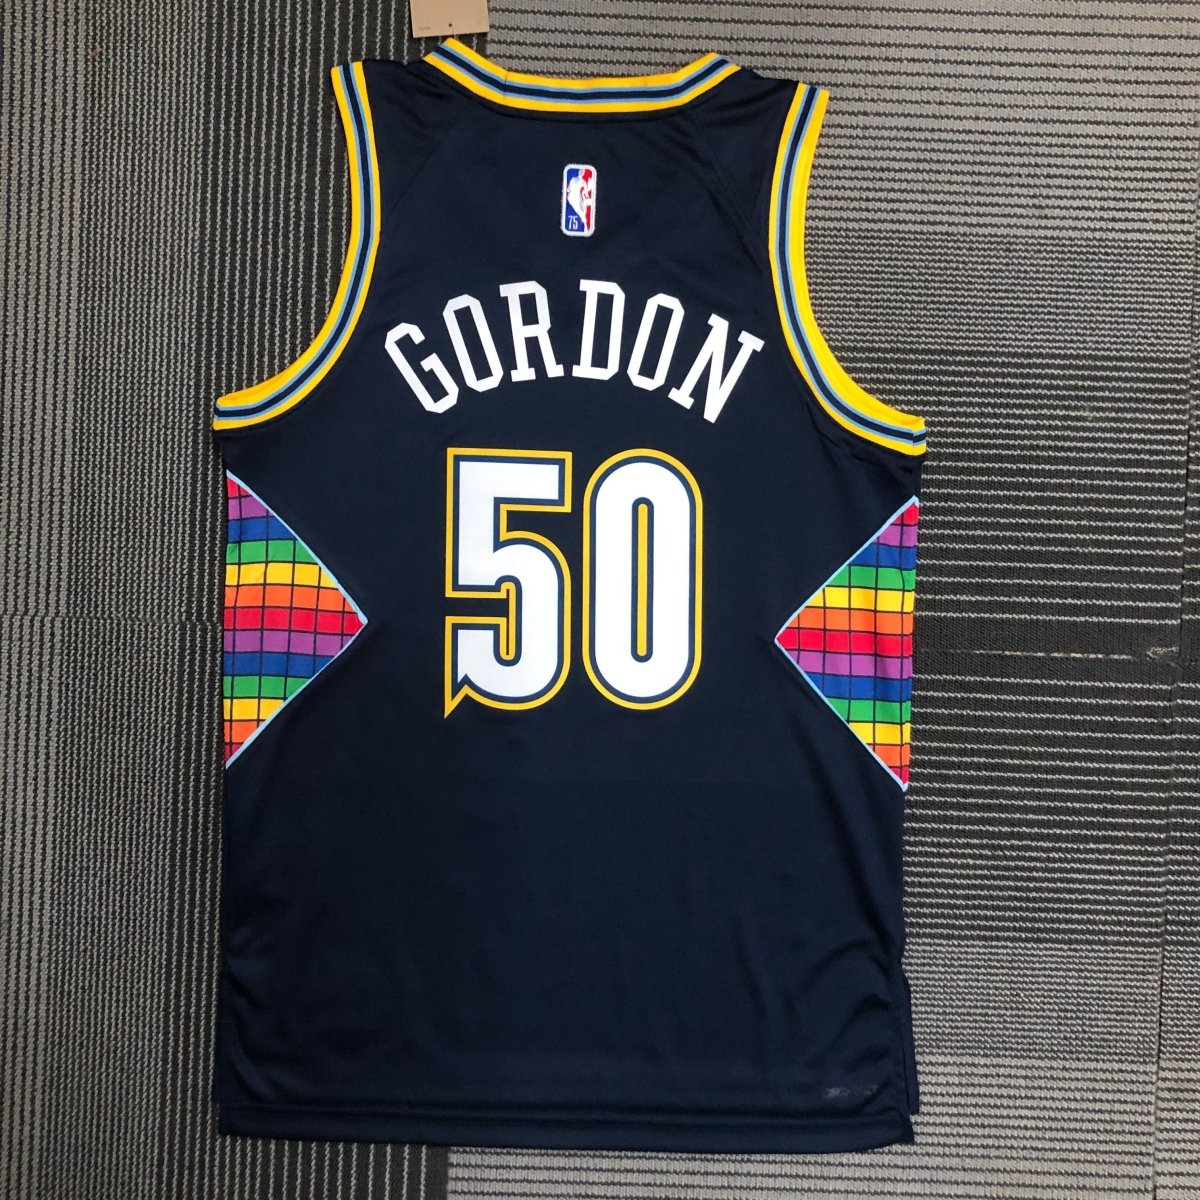 Denver Nuggets introduce new City Edition jersey, Sports